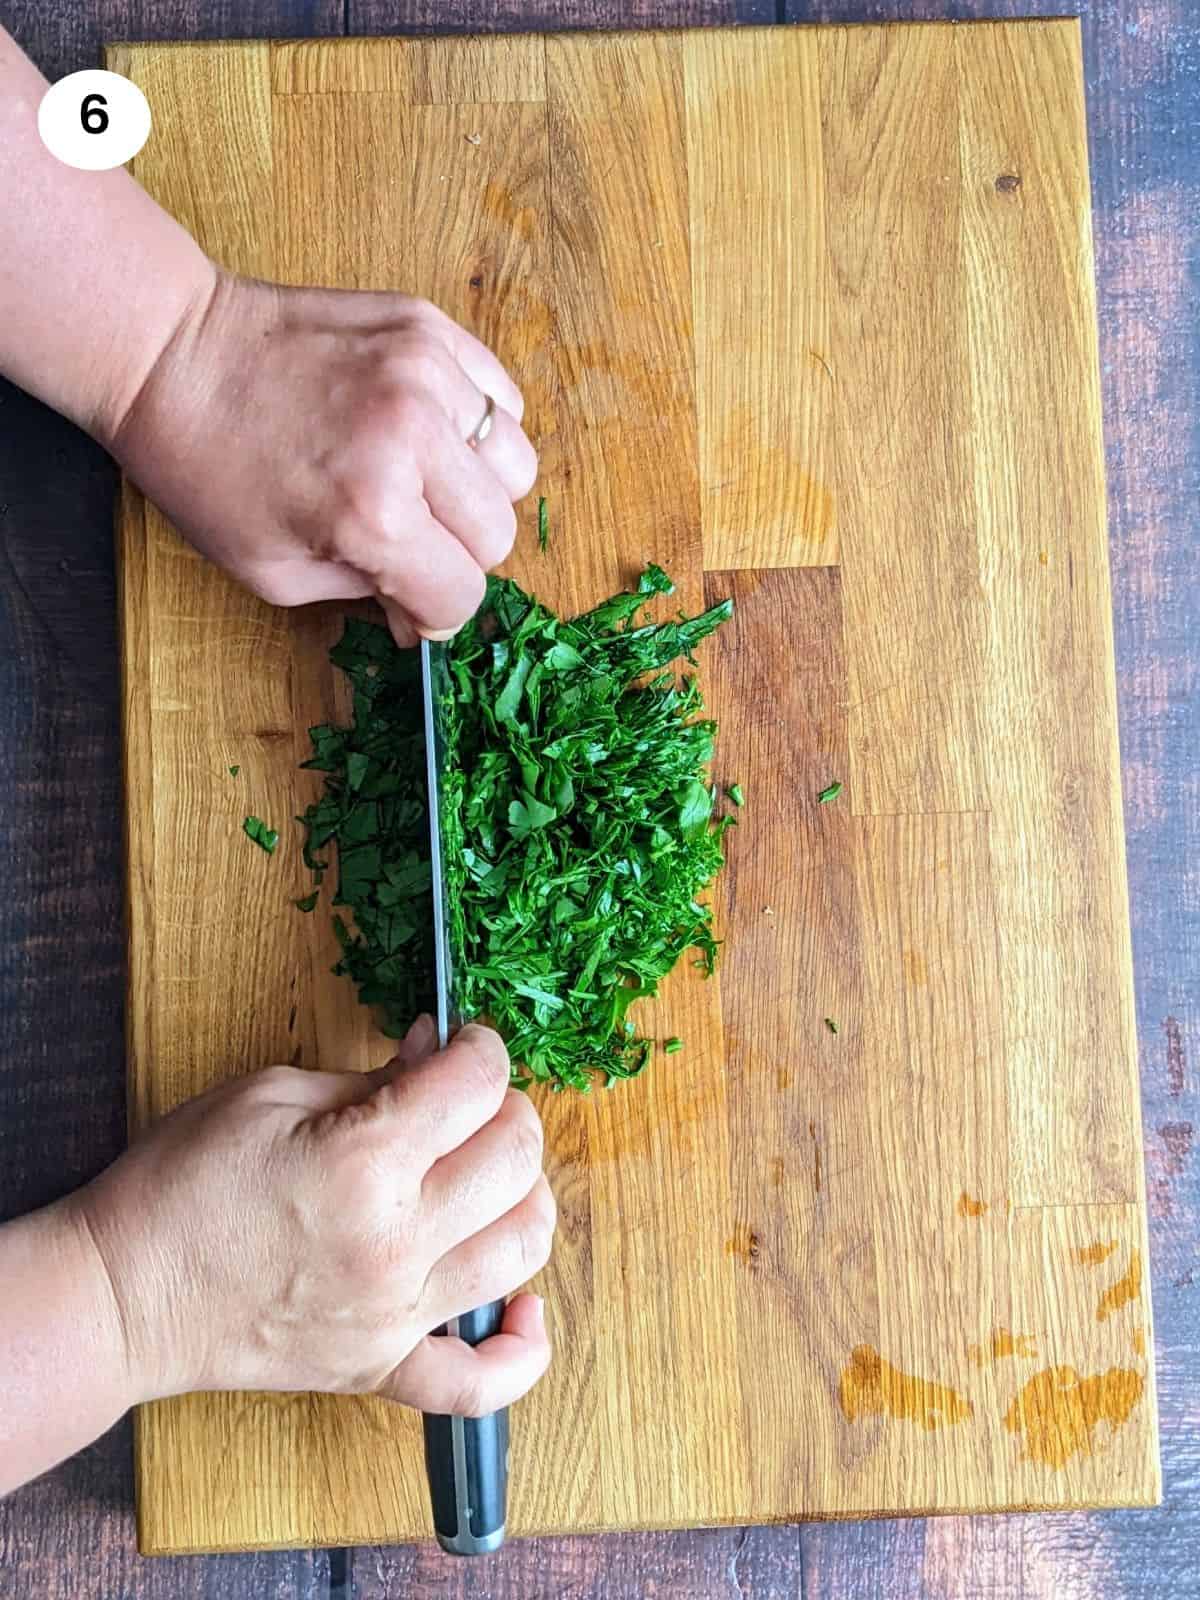 Cutting the parsley coarsely.